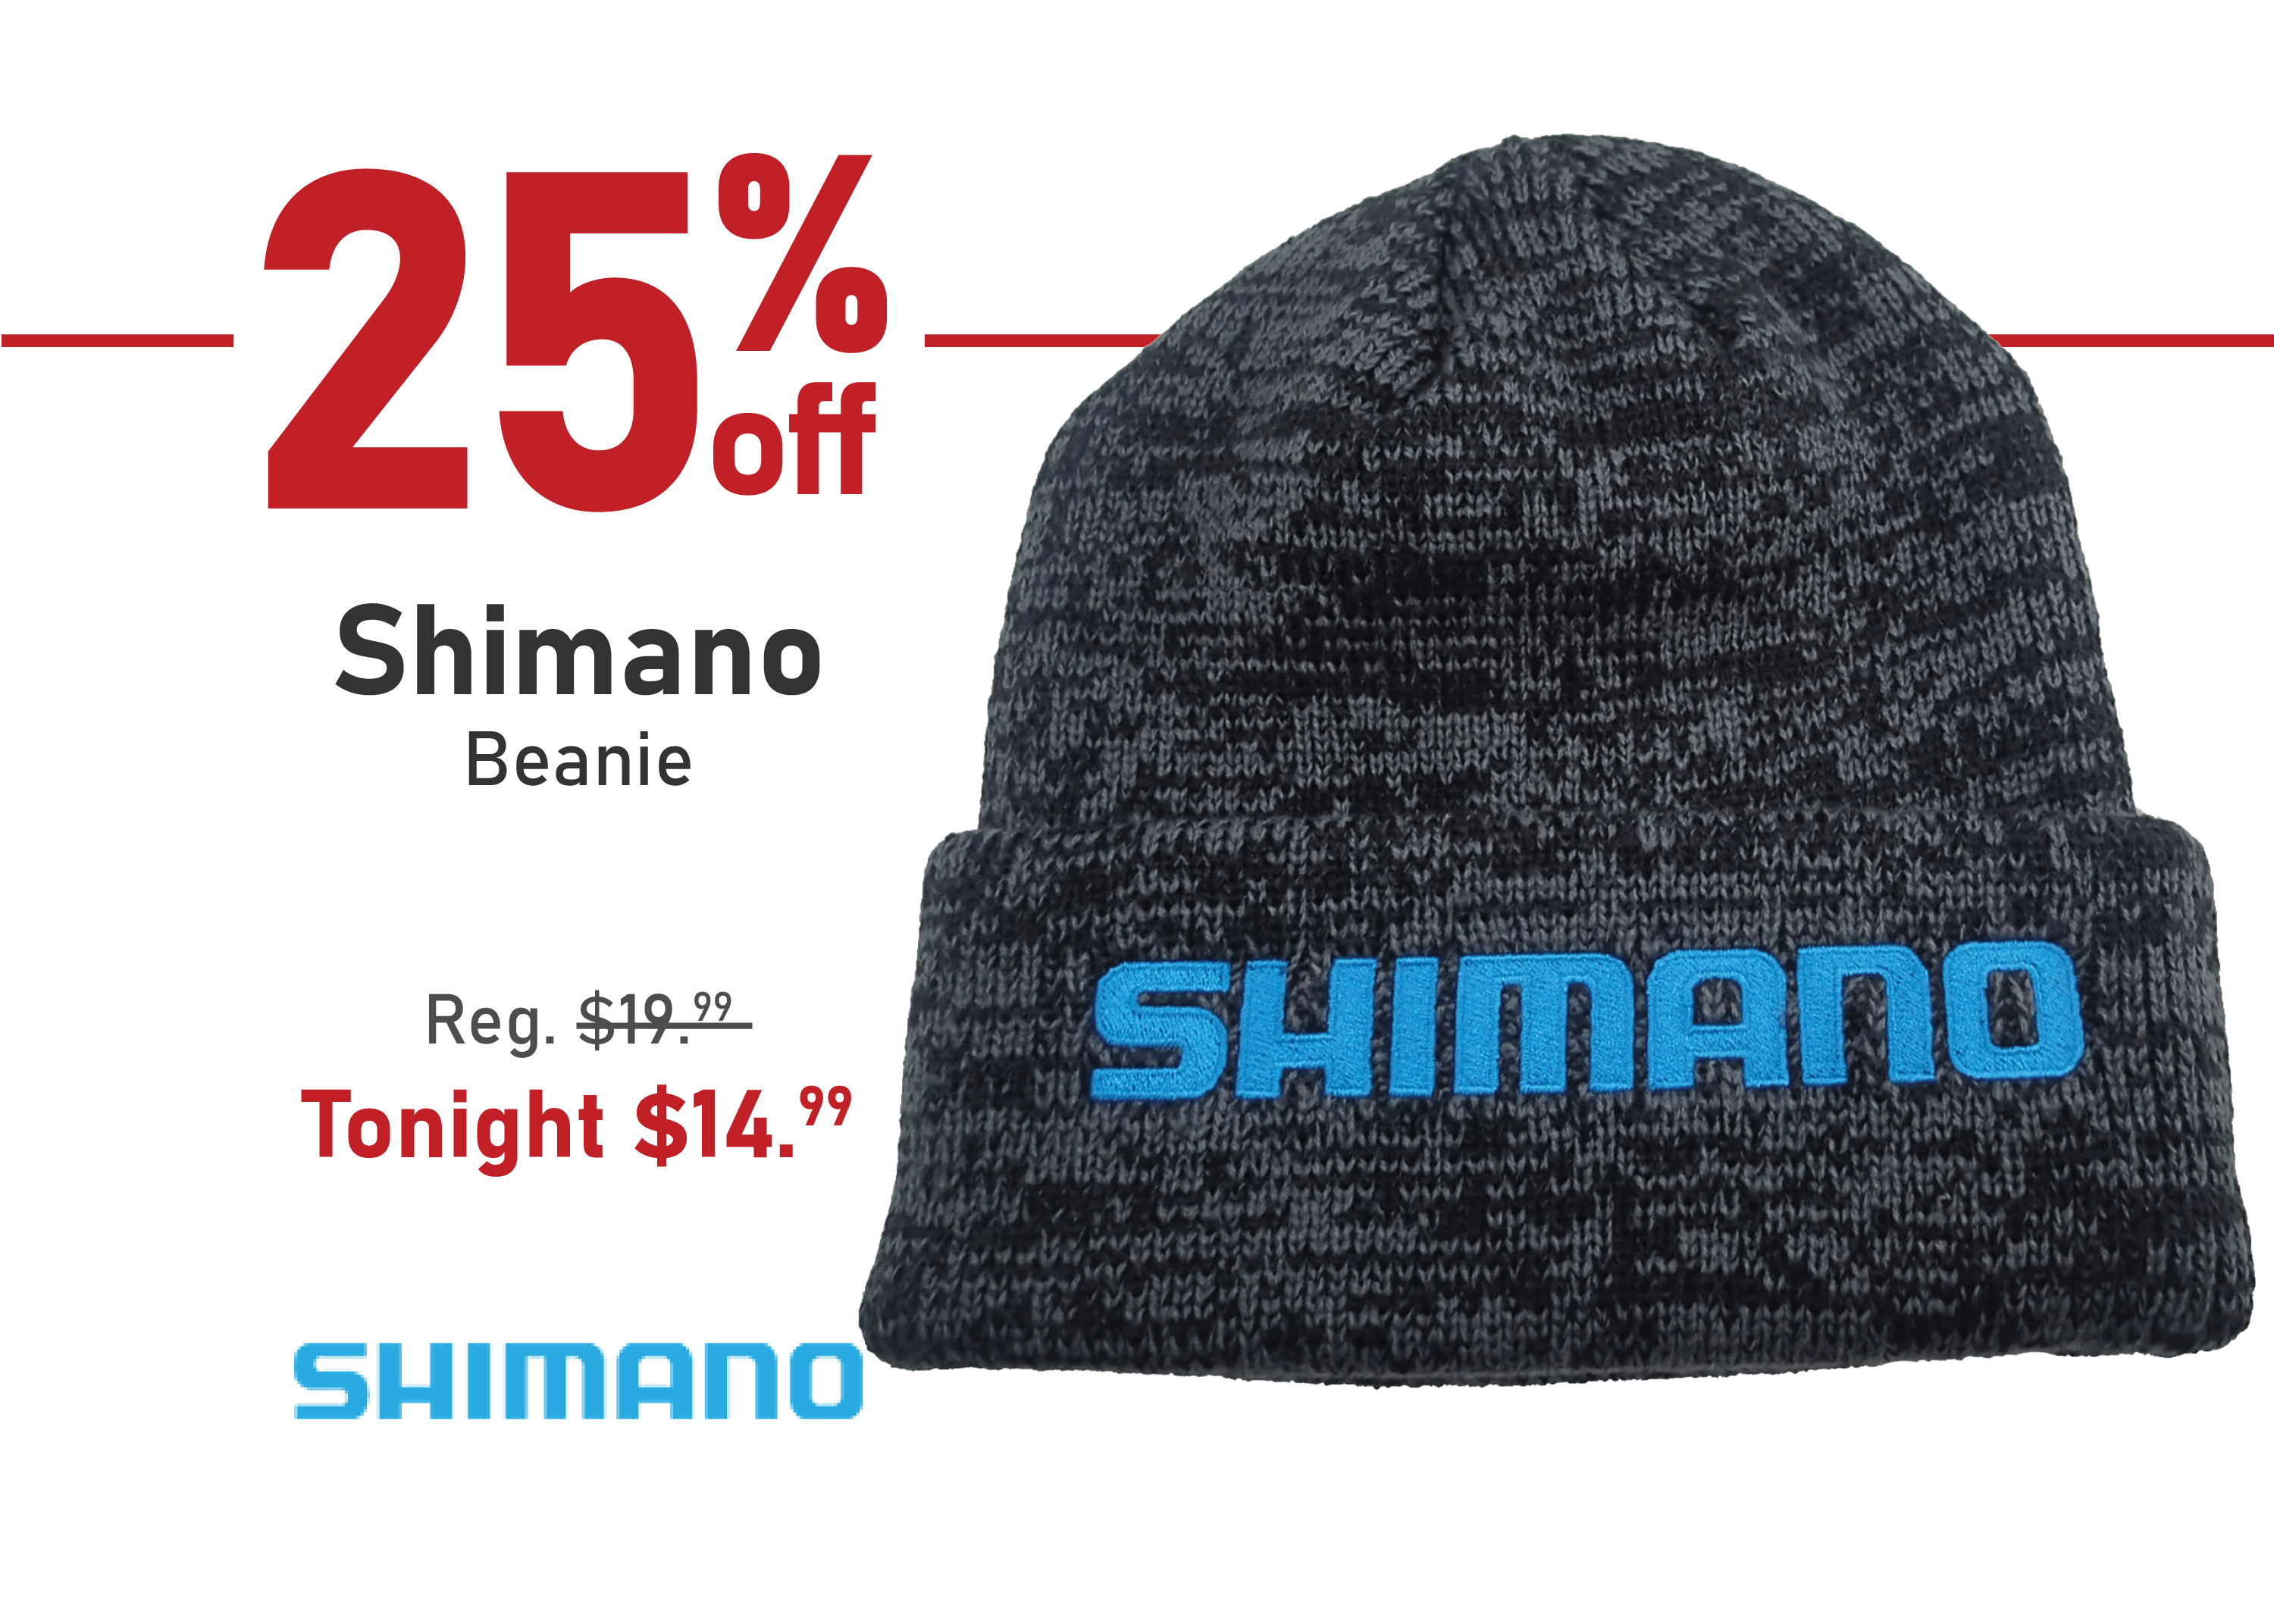 Save 25% on the Shimano Beanie